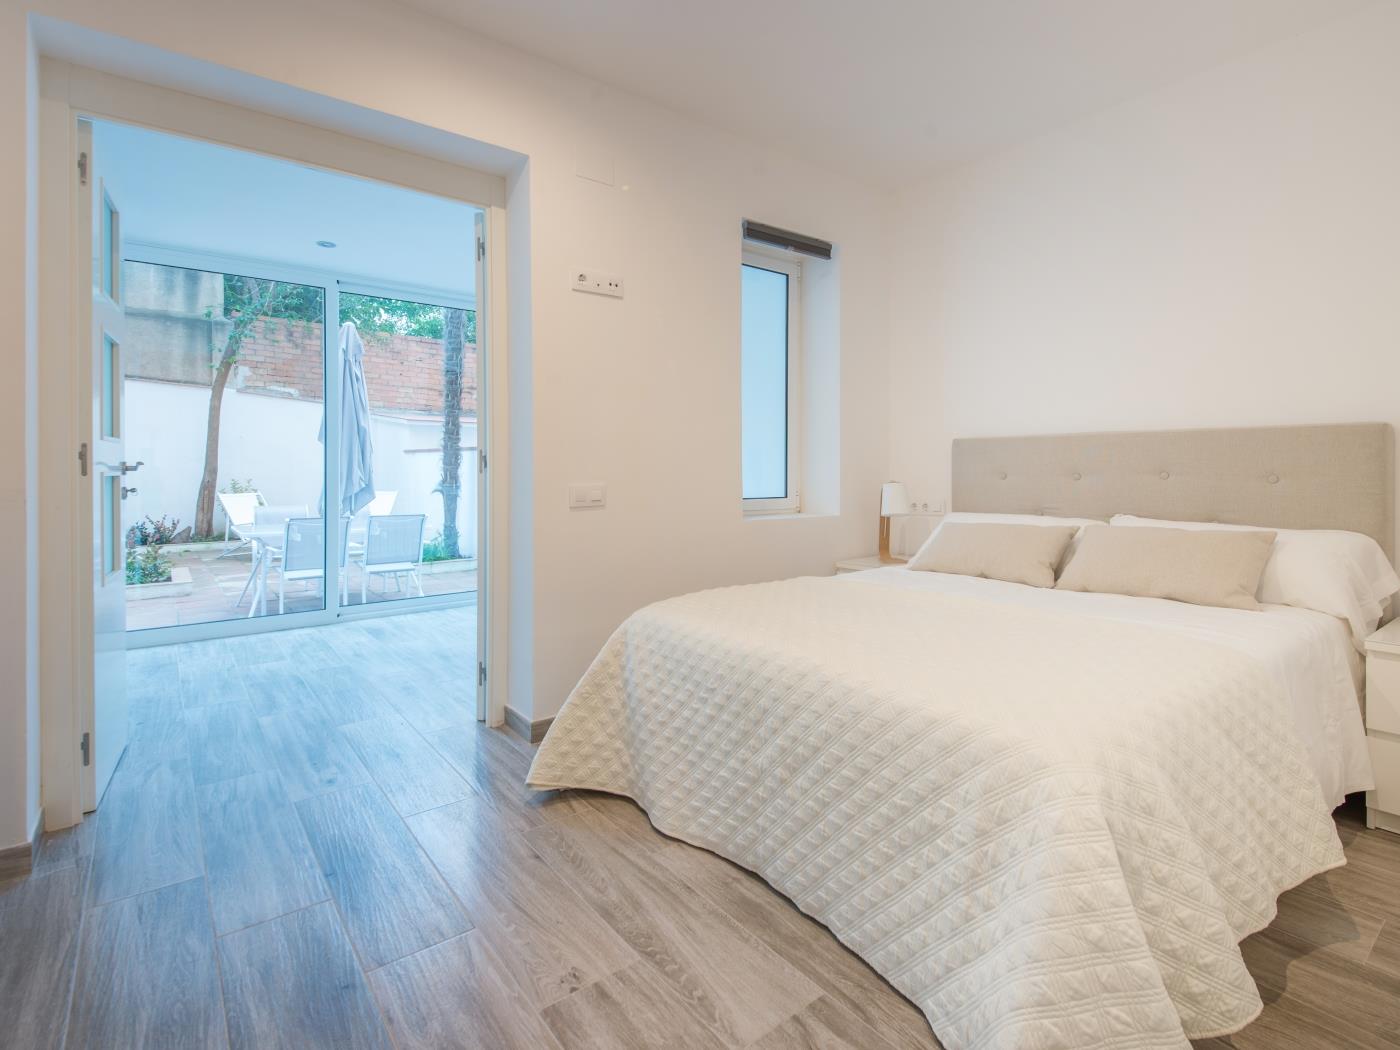 Apartment with private terrace furnished and equipped for monthly rentals - My Space Barcelona Apartments